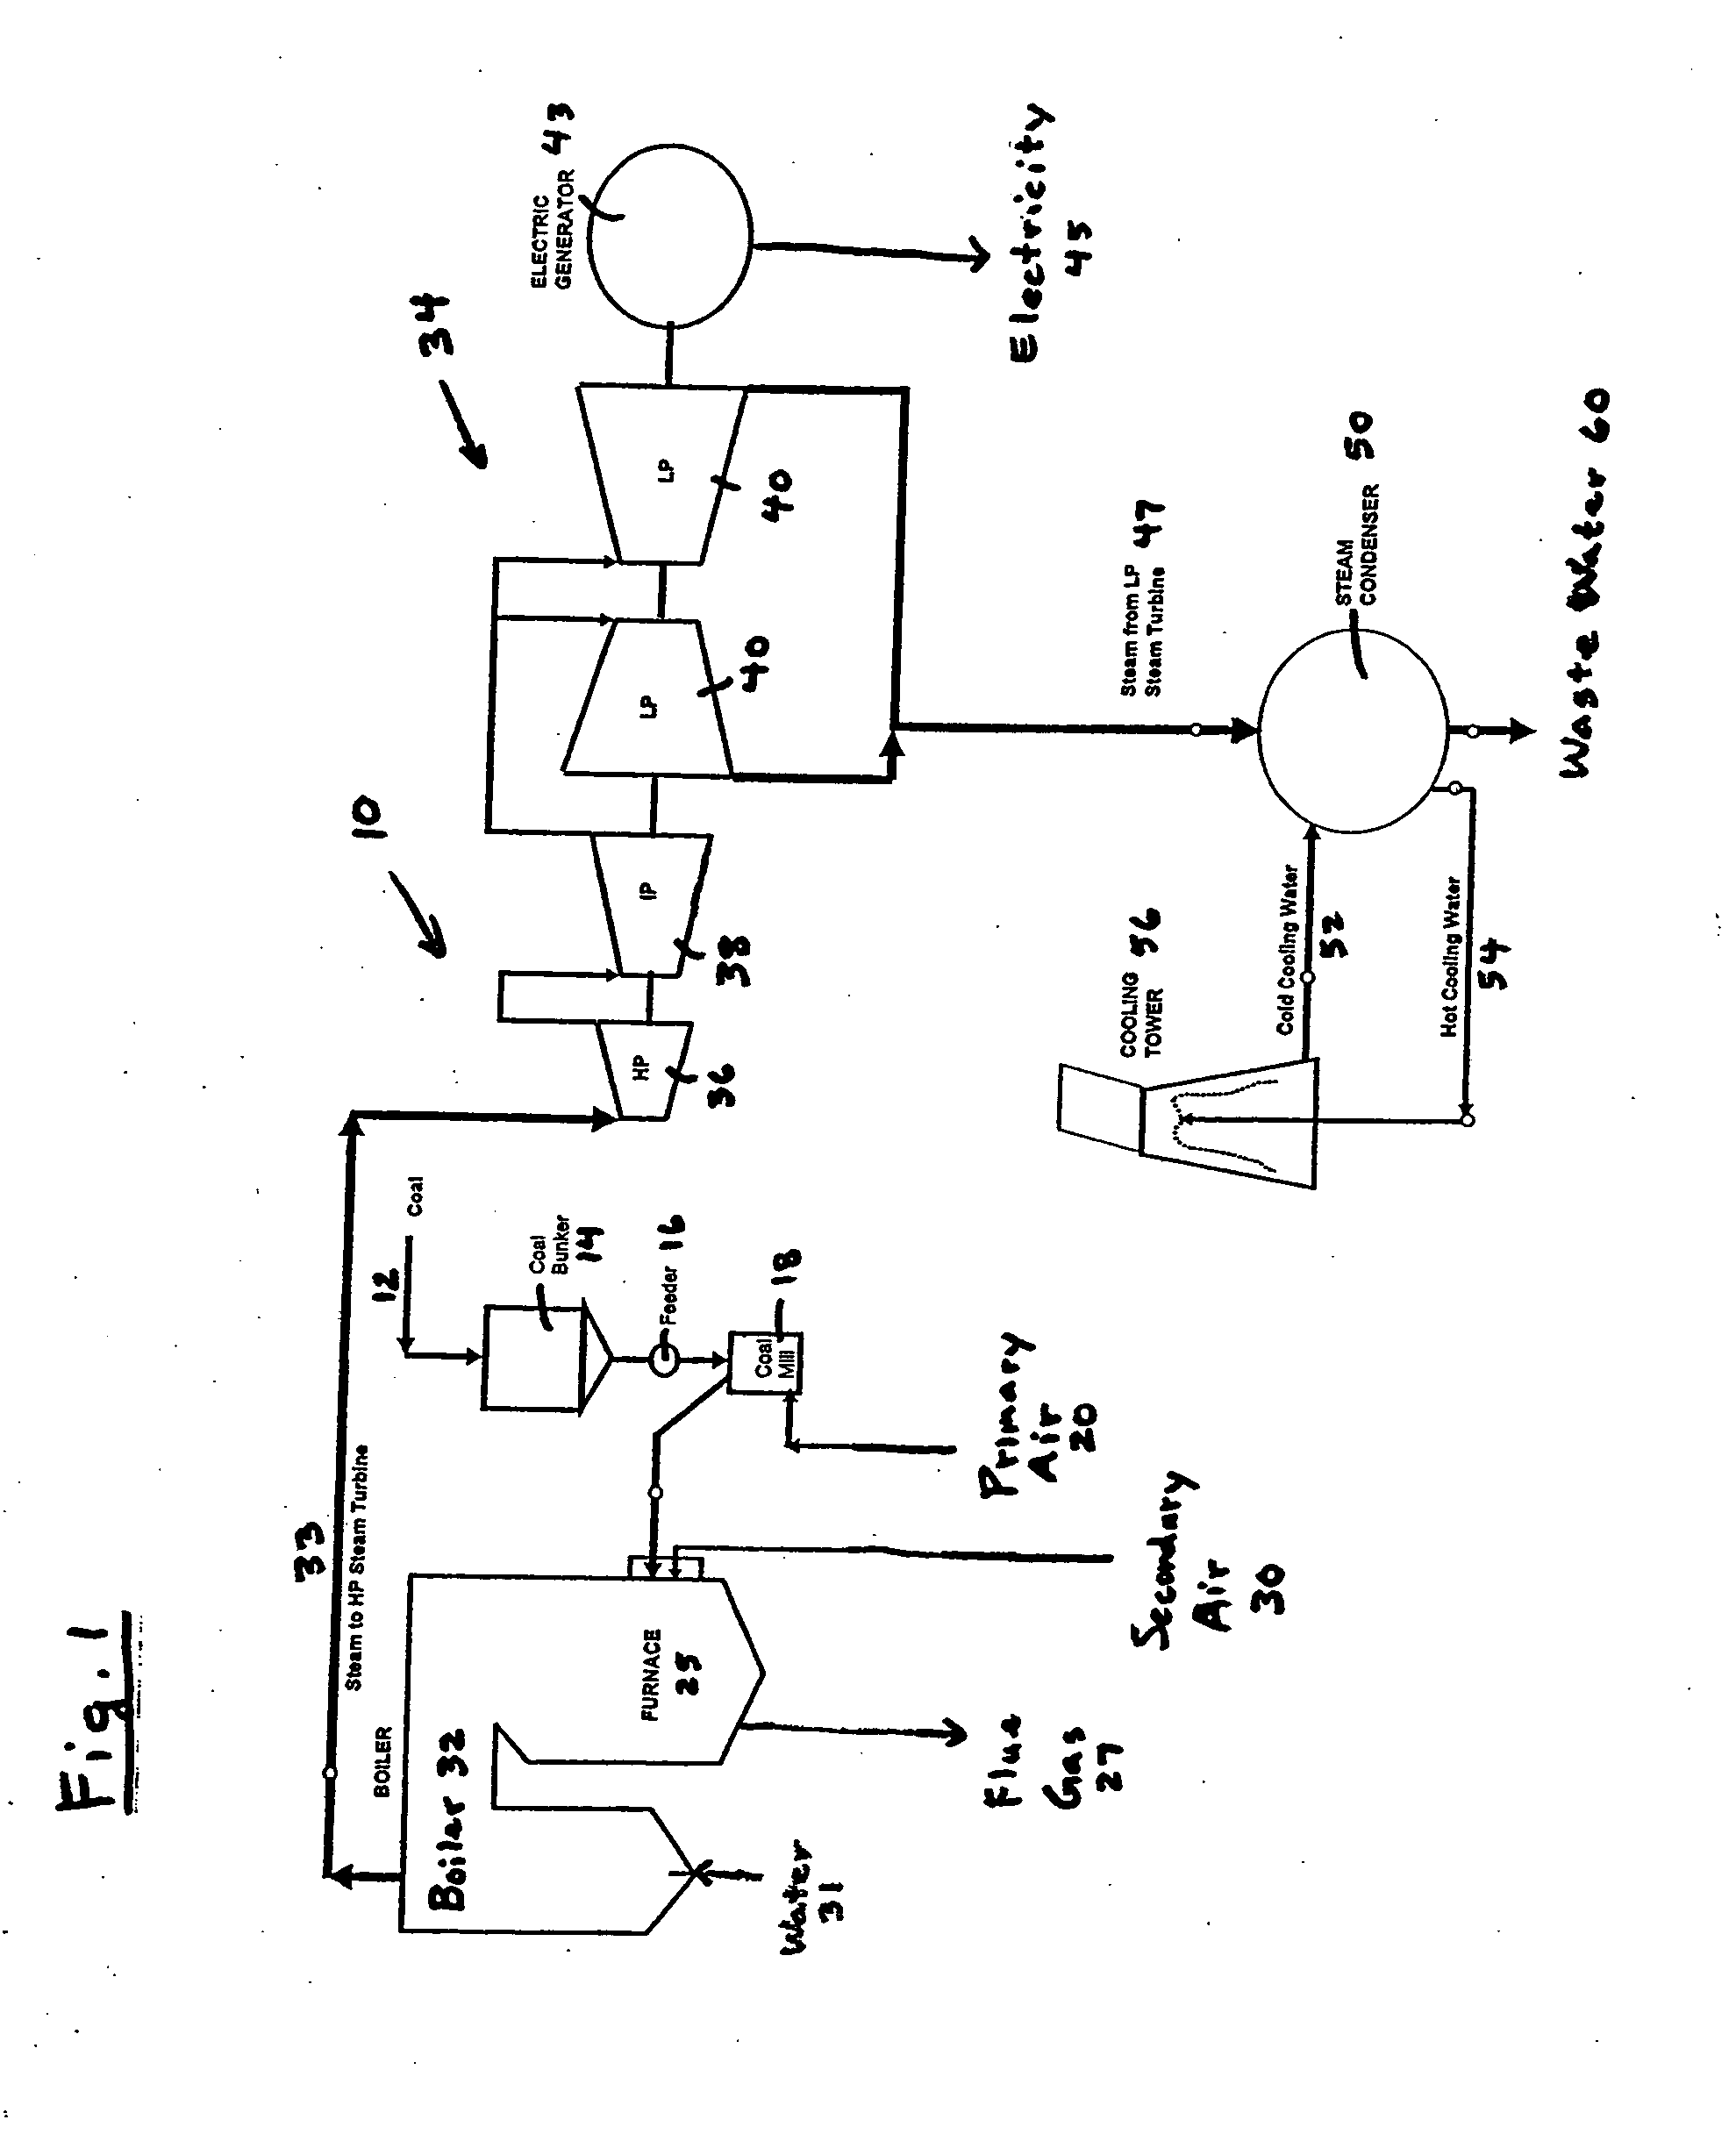 Method of enhancing the quality of high-moisture materials using system heat sources